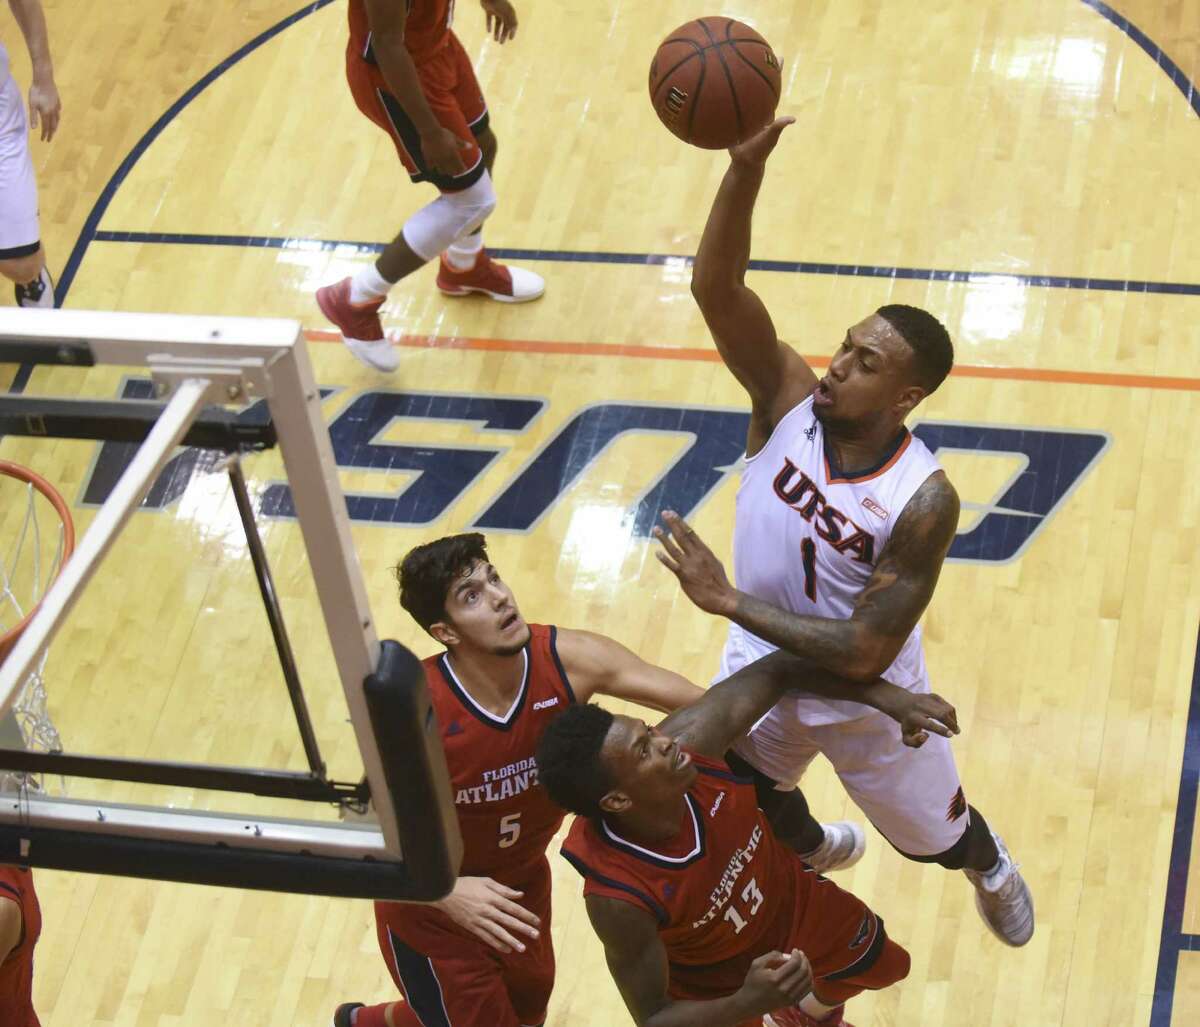 Jeff Beverly of UTSA shoots over William Pfister (5) and Marcus Neely (13) of Florida Atlantic during college basketball action in the UTSA Convocation Center on Thursday, Jan. 12, 2017.